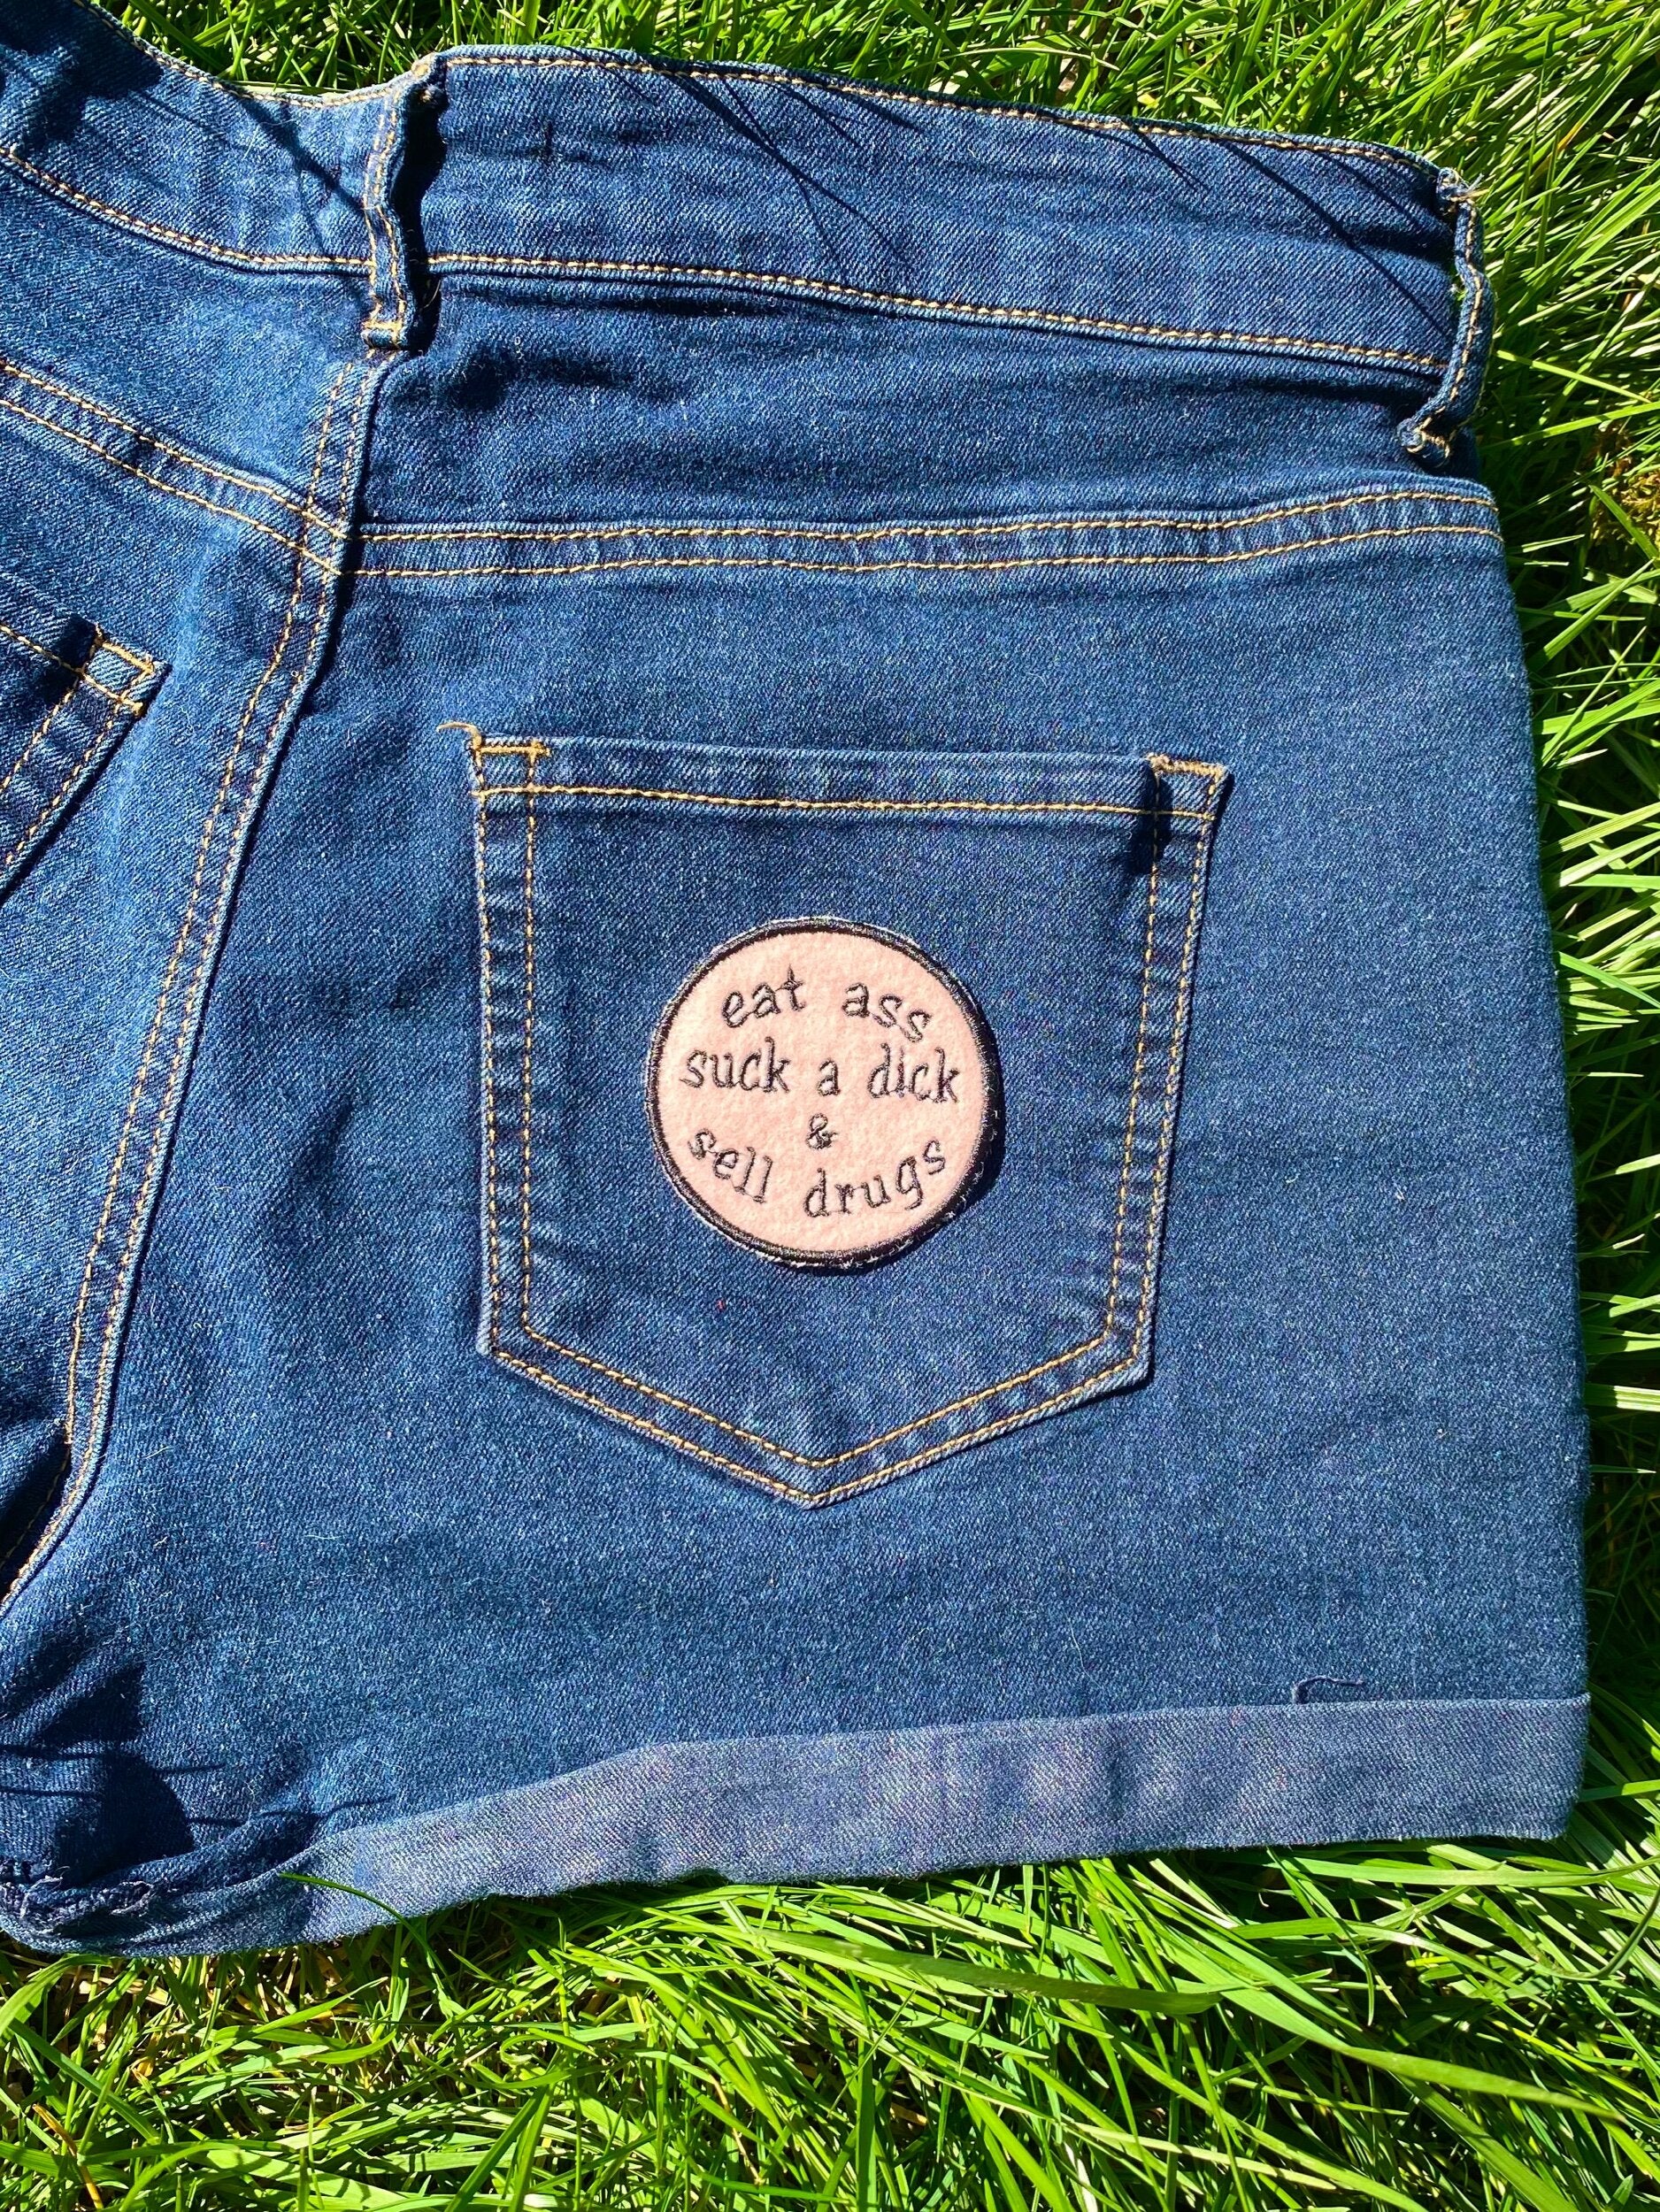 Eat Ass Suck a Dick and Sell Drugs Embroidered Iron-on Patch - IncredibleGood Inc